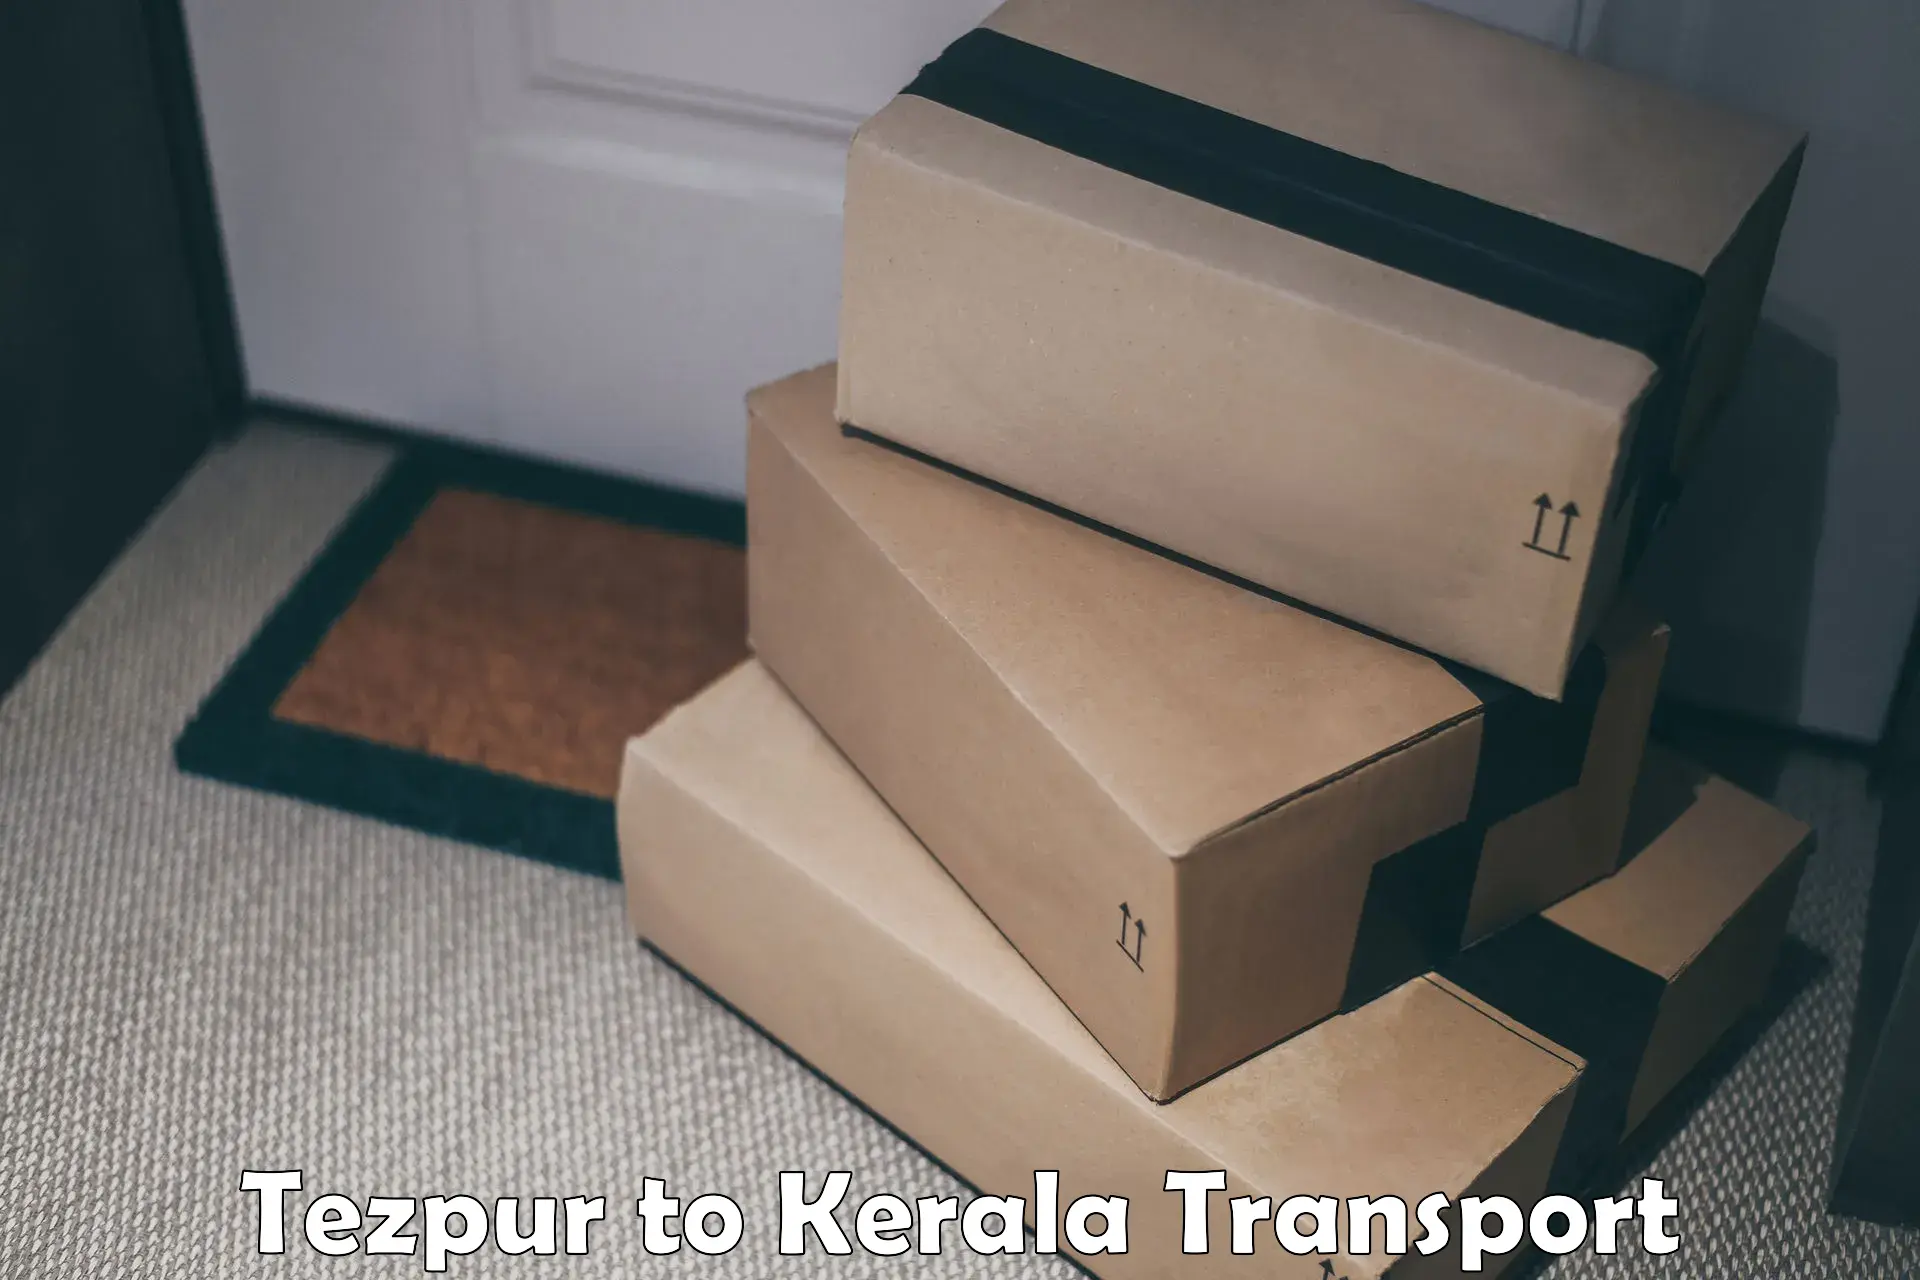 Daily transport service Tezpur to Chalakudy